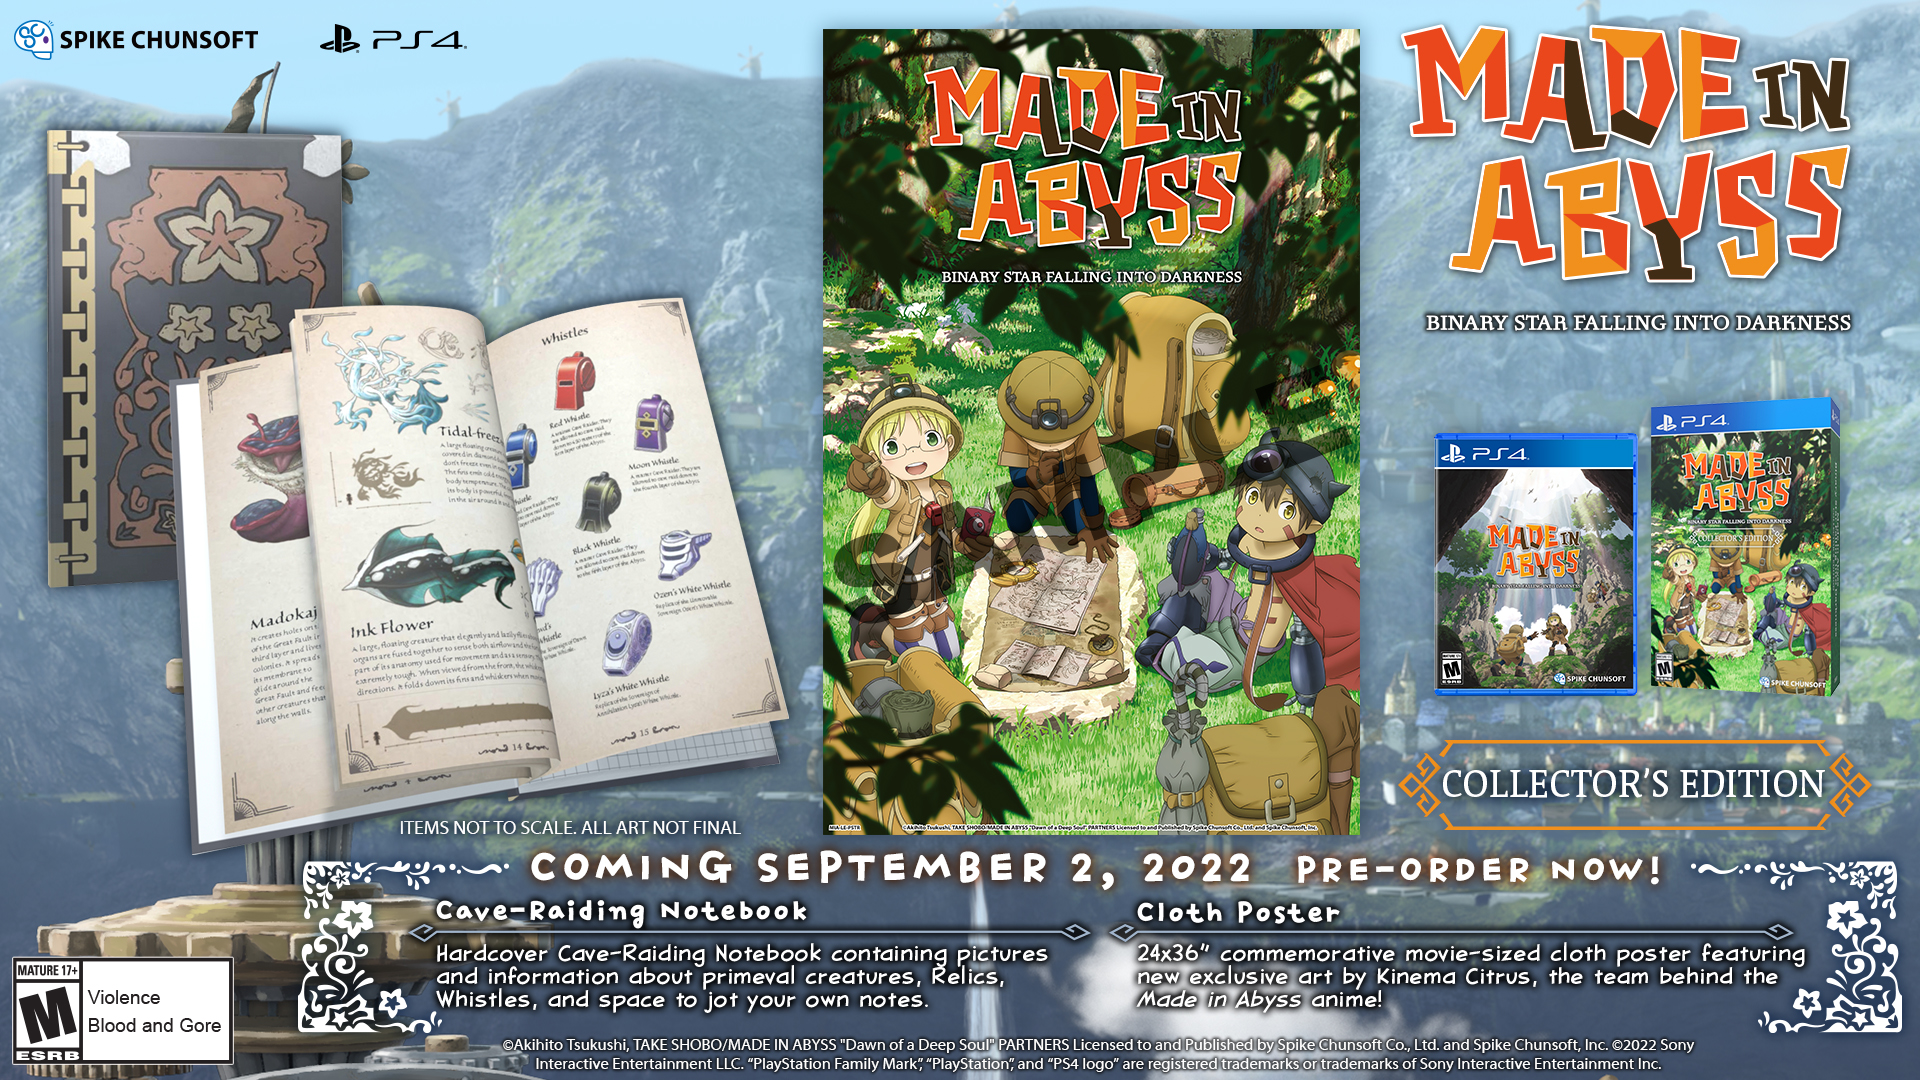 Made in Abyss: Binary Star Falling into Darkness Collector's Edition,  PlayStation 4, Spike Chunsoft, 811800030384 